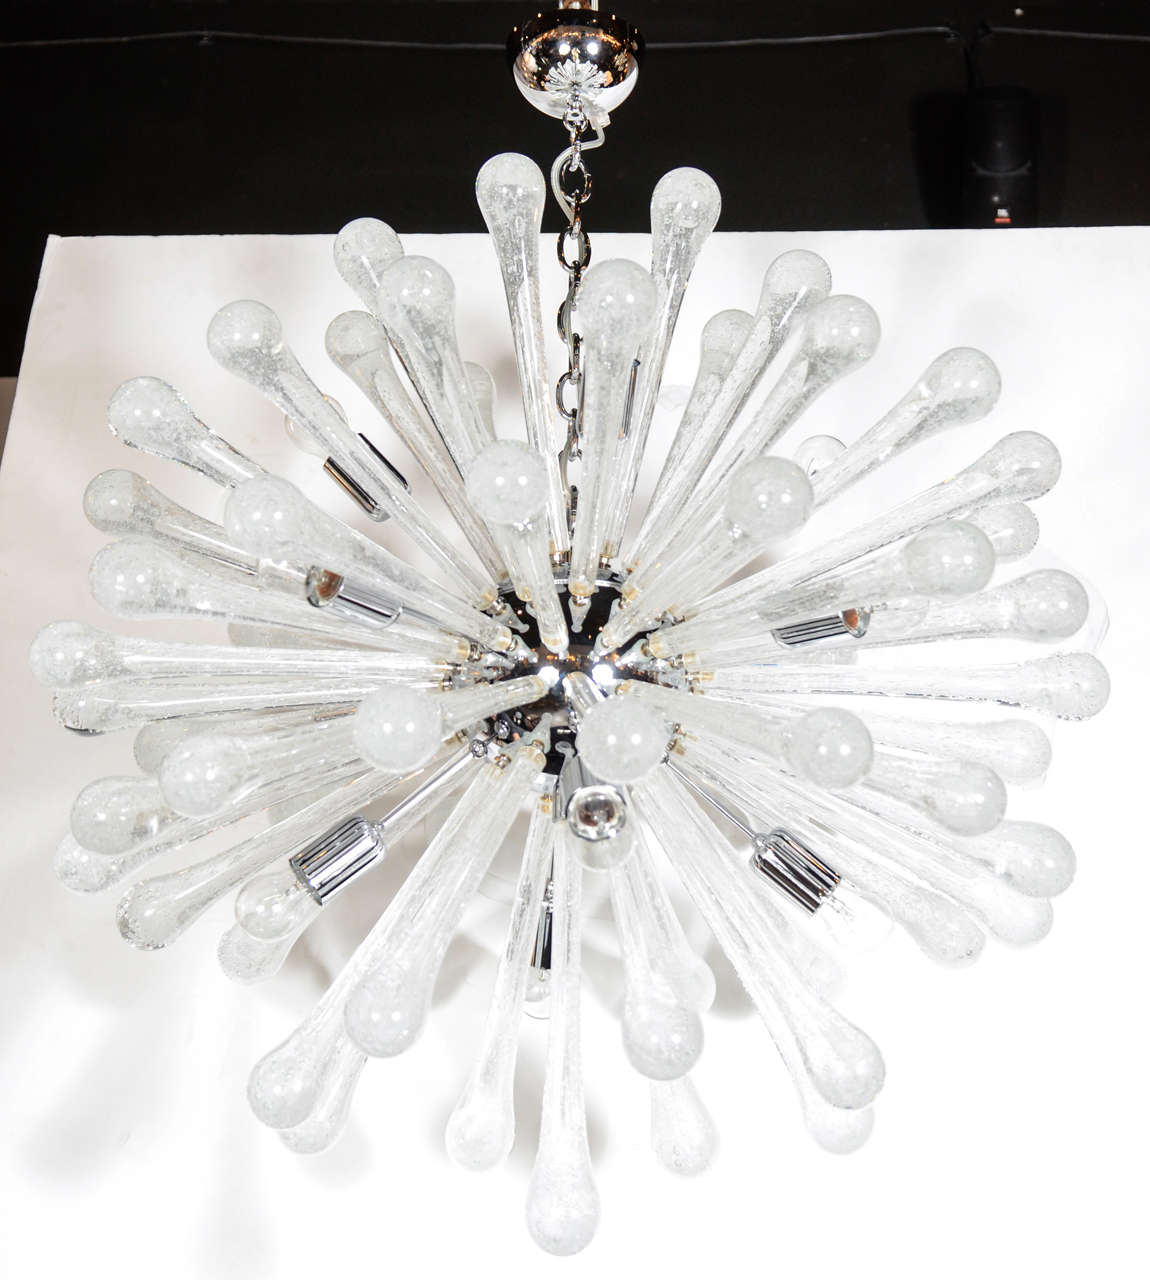 This gorgeous glass Sputnik chandelier was realized in Murano, Italy- the island off the coast of Venice renowned for centuries for its superlative glass production. It features an abundance of translucent hand blown Murano textured glass rods with